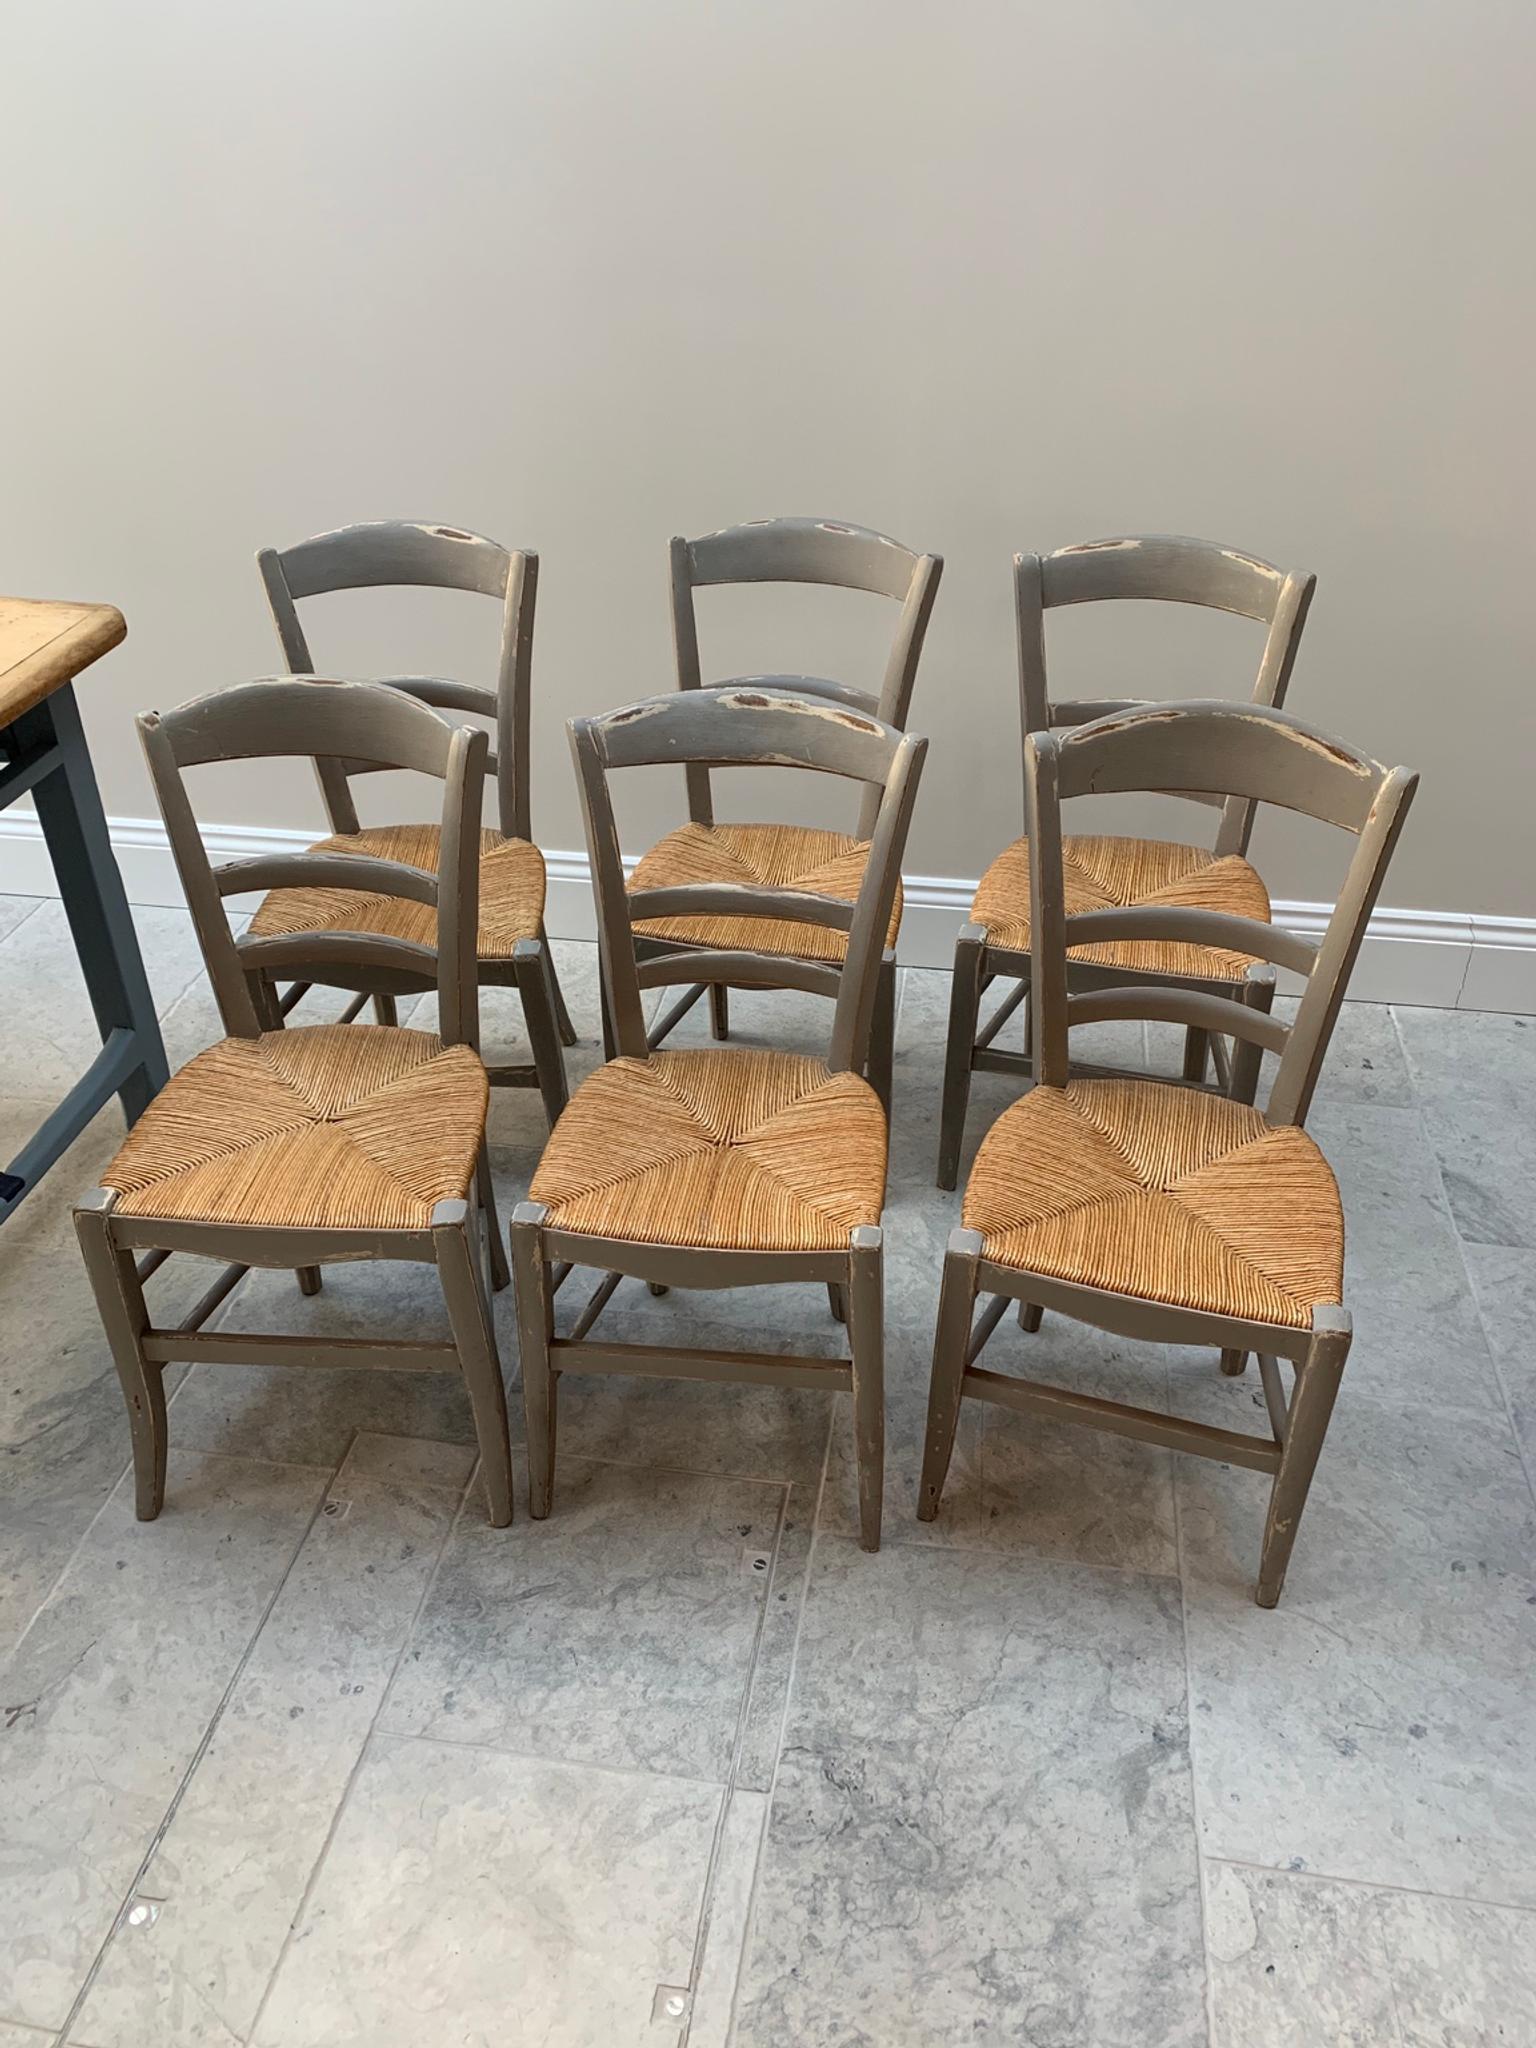 6 X Shabby Chic Grey Painted Dining Chairs In Sw15 London Fur 50 00 Zum Verkauf Shpock At